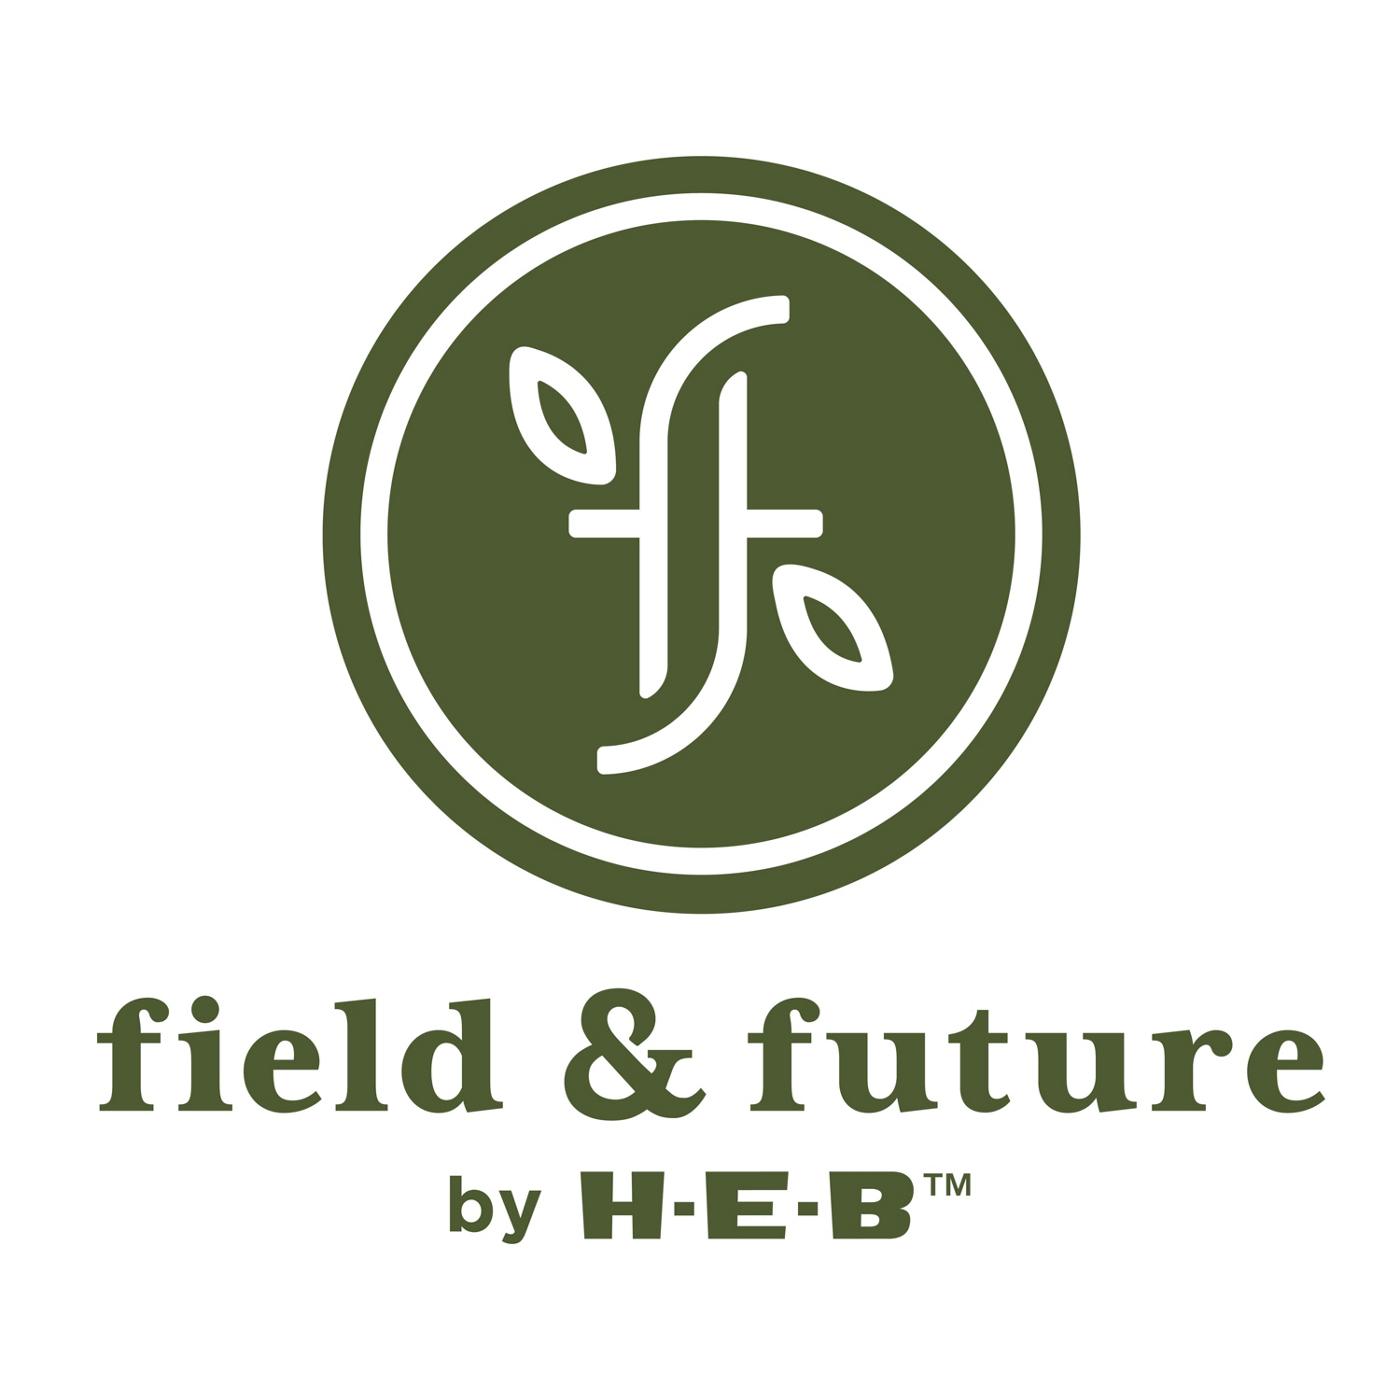 Field & Future by H-E-B Foaming Hand Soap - Big Bend Sage; image 2 of 3